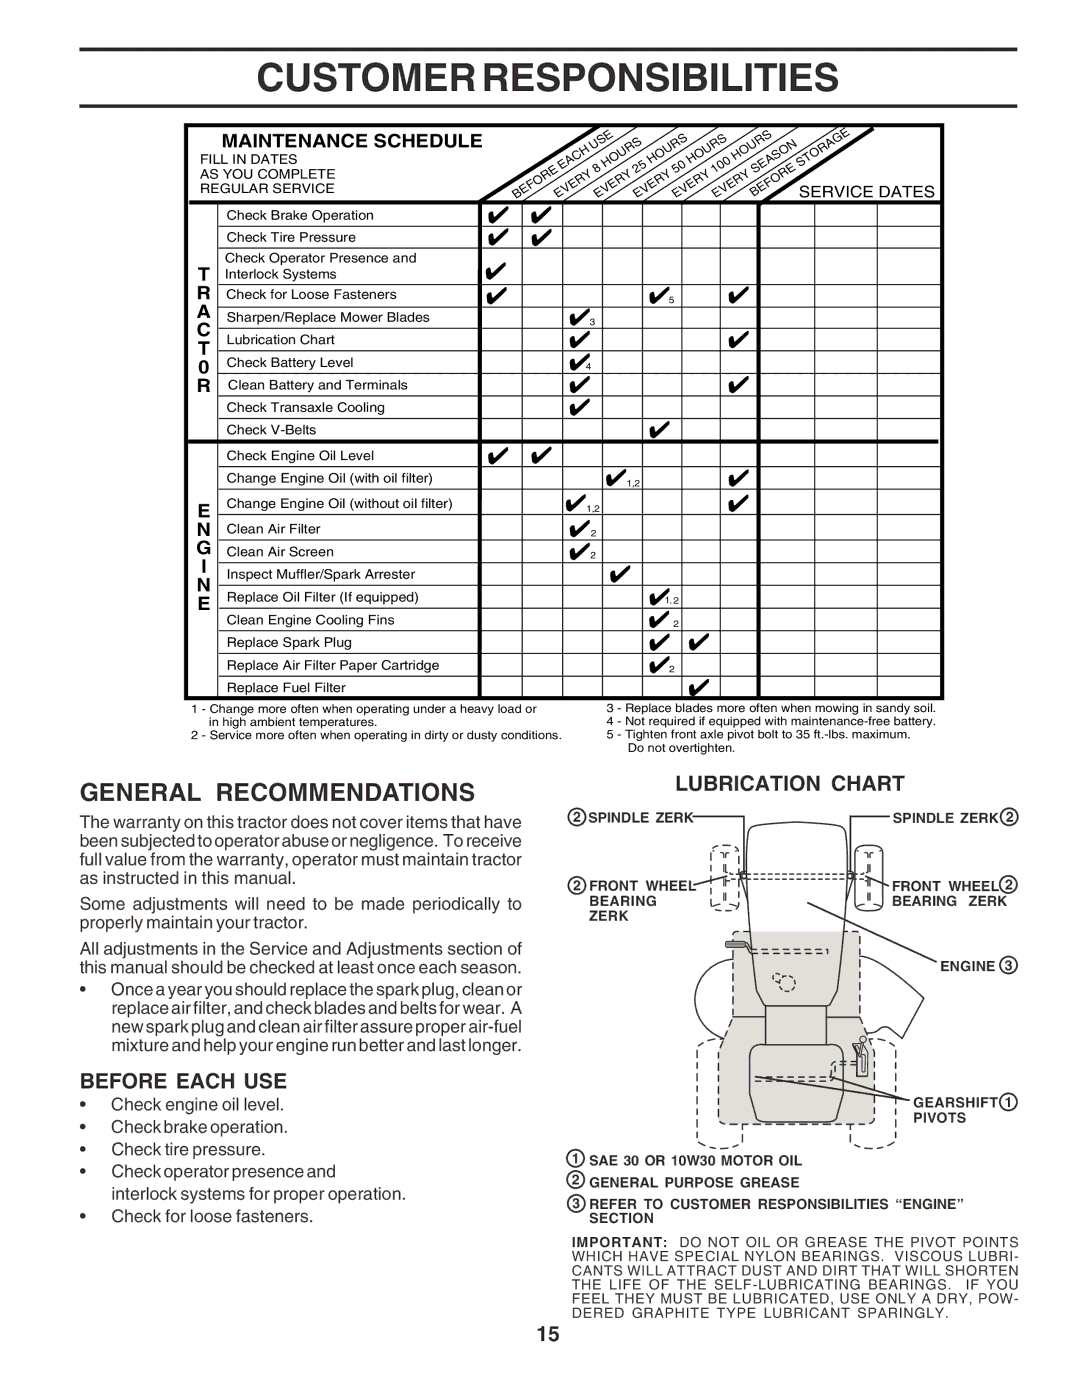 Poulan 183046 owner manual Customer Responsibilities, General Recommendations, Lubrication Chart, Before Each USE 